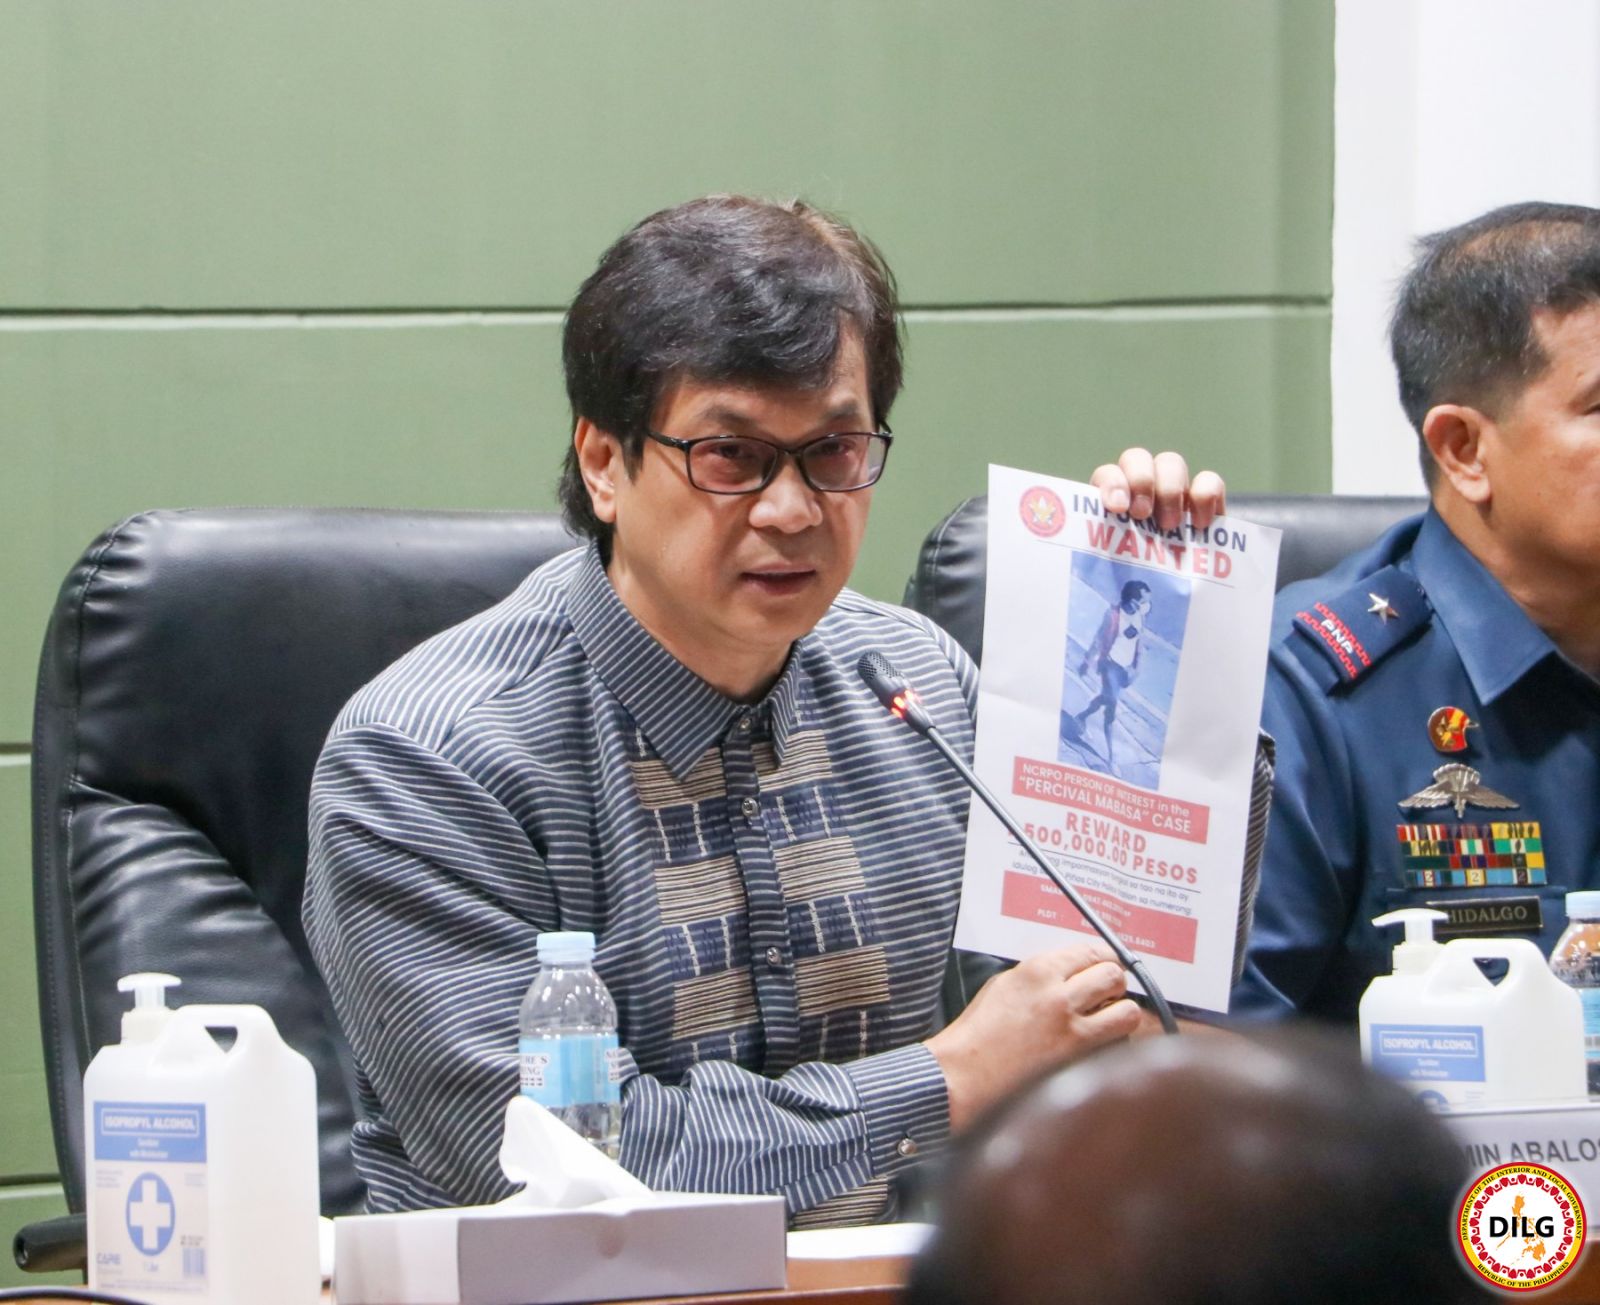 DILG Sec. shows a picture of one of the suspects